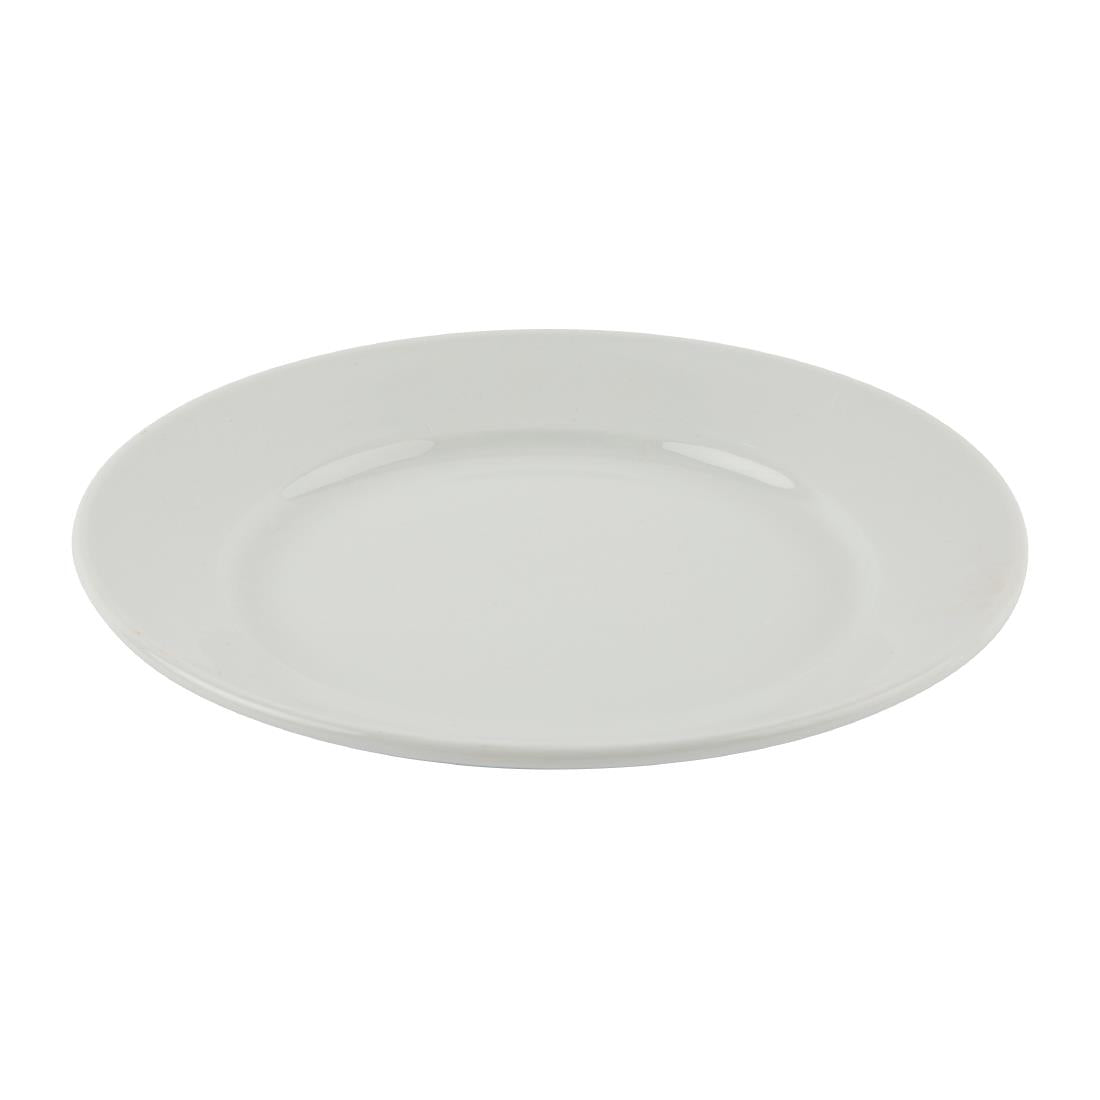 Athena Hotelware Wide Rimmed Plates 202mm (Pack of 12) JD Catering Equipment Solutions Ltd